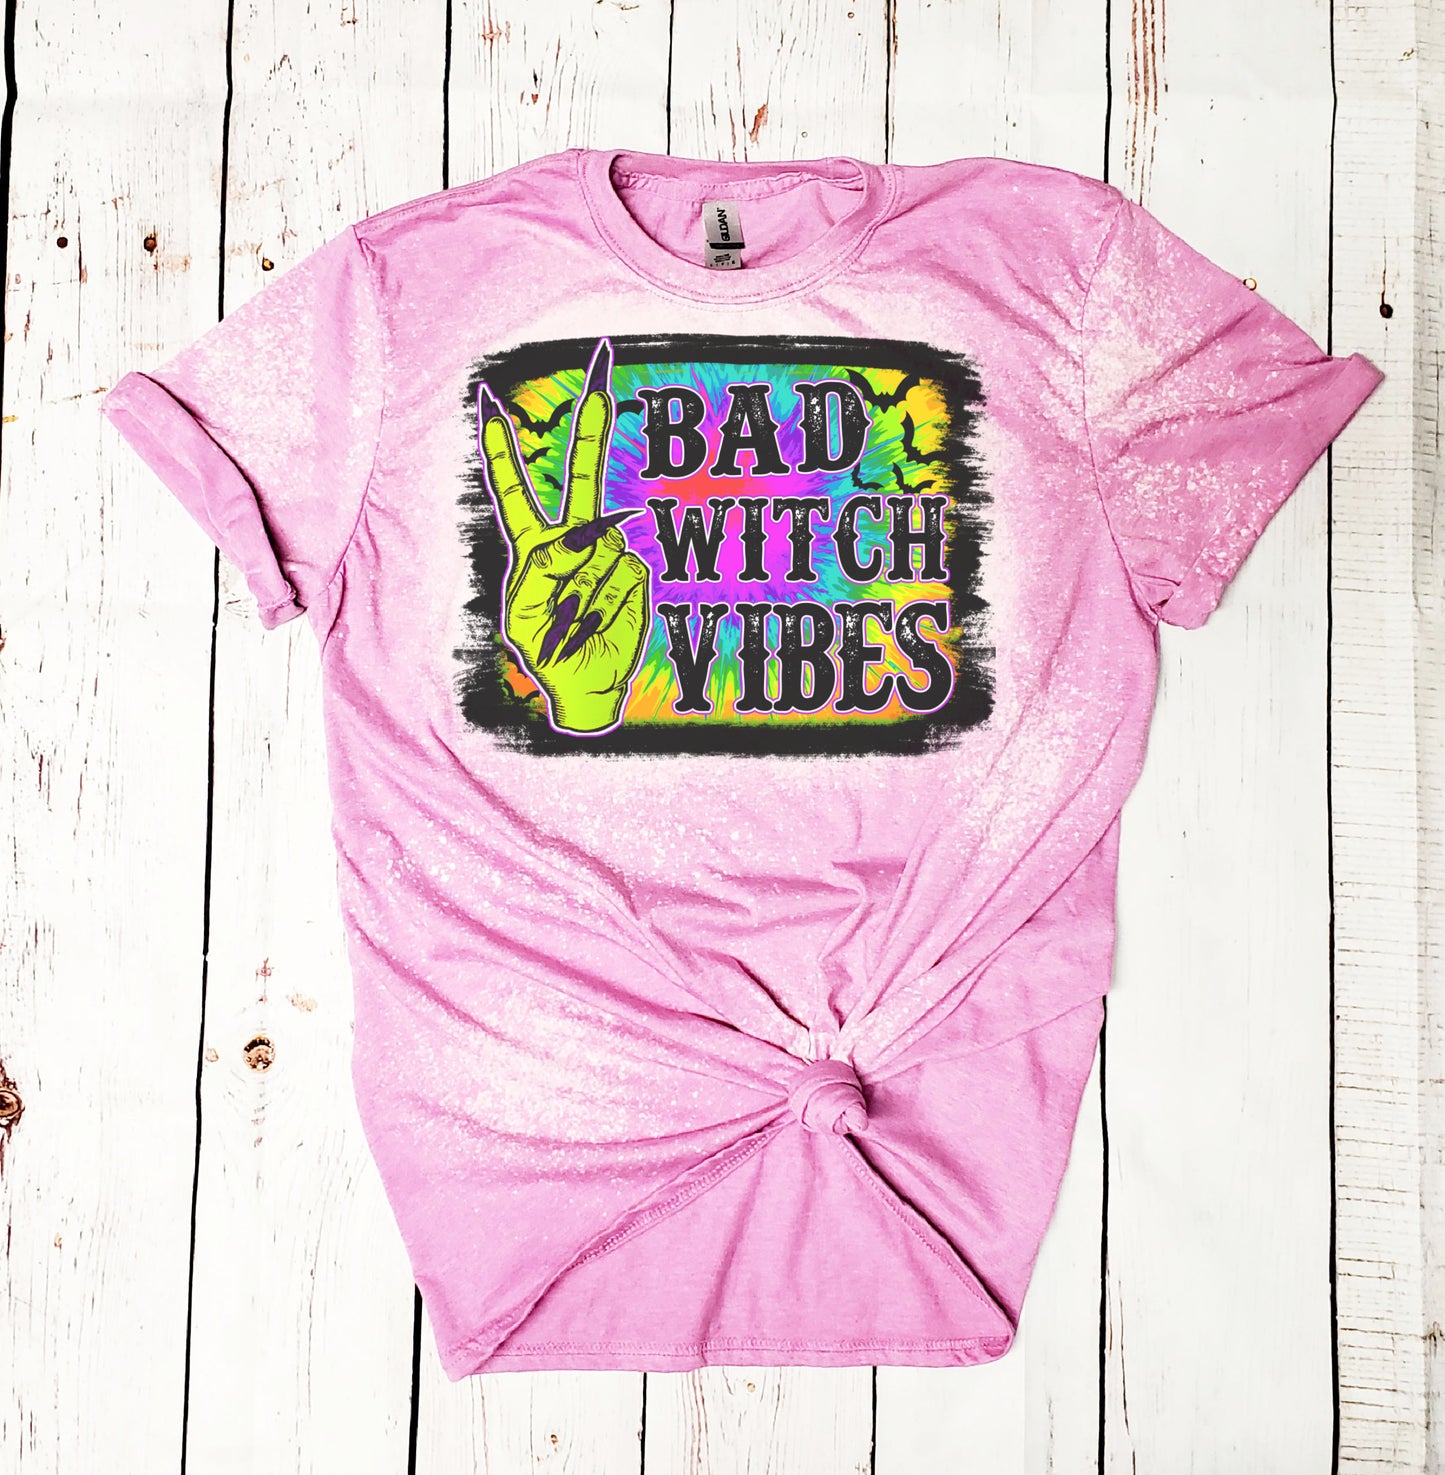 Tie Dye Bad Witch Vibes Shirt